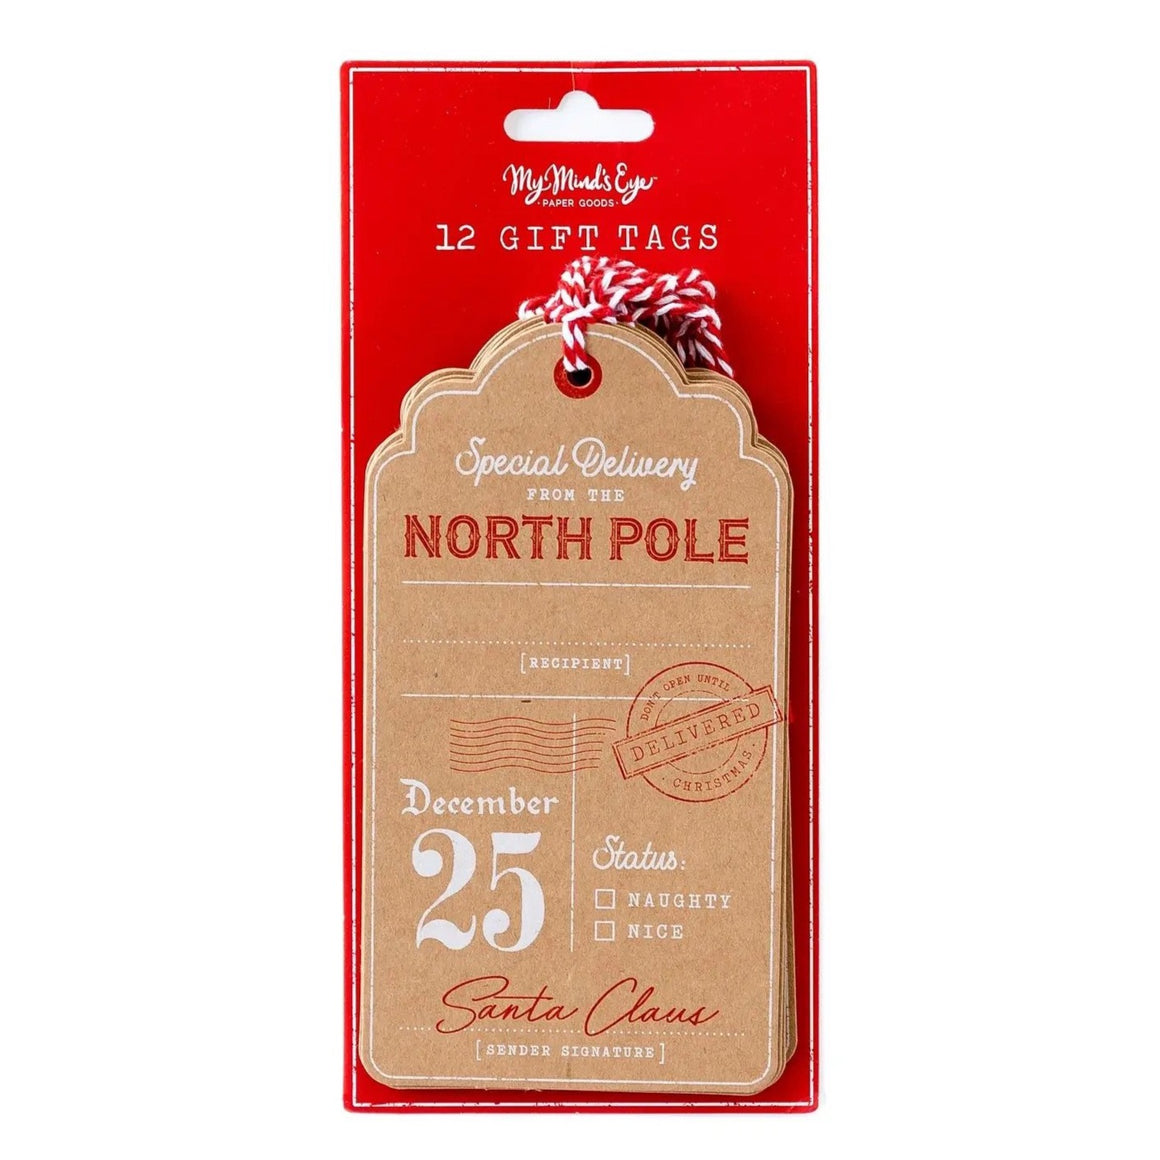 GIFT TAGS - NORTH POLE KRAFT OVERSIZED TAGS